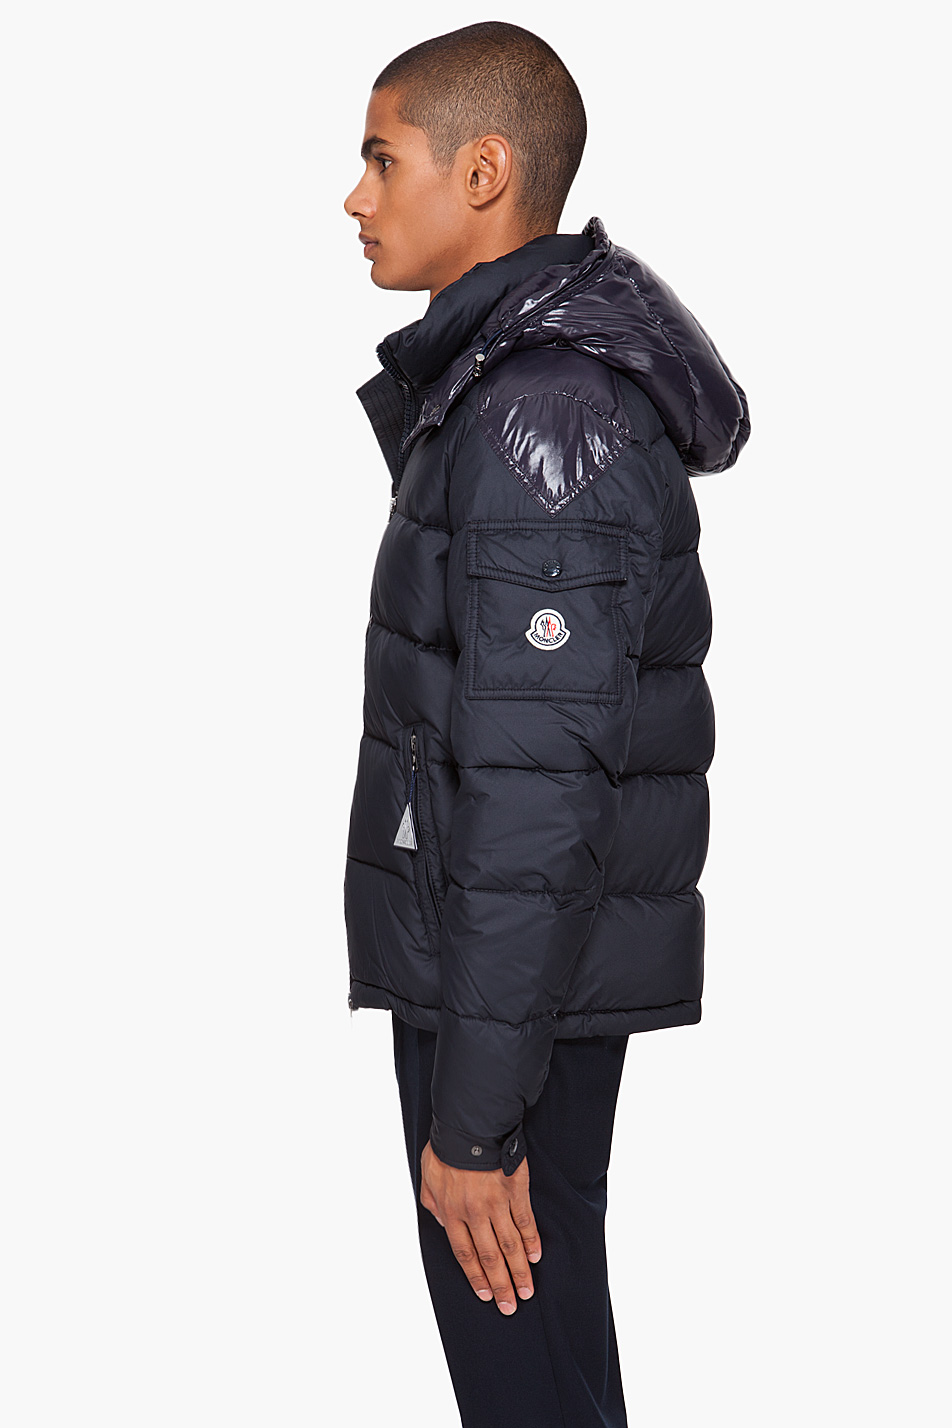 moncler chevalier jacket Cheaper Than Retail Price> Buy Clothing,  Accessories and lifestyle products for women & men -